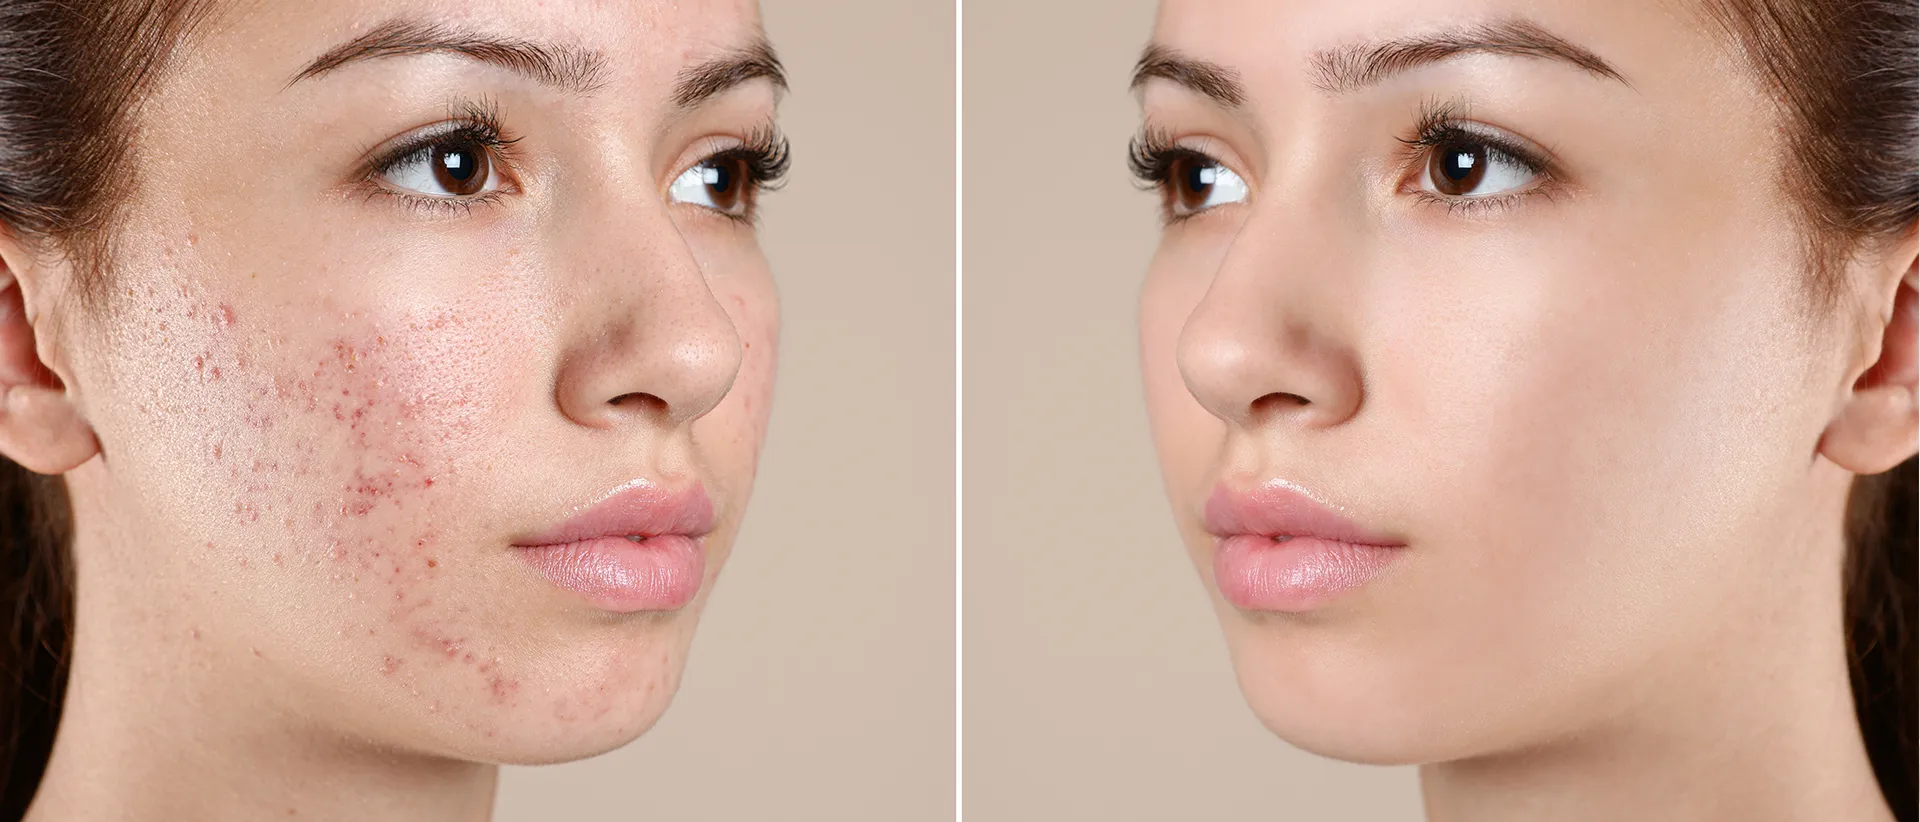 Girl's face with blemish-prone skin and with clear skin.